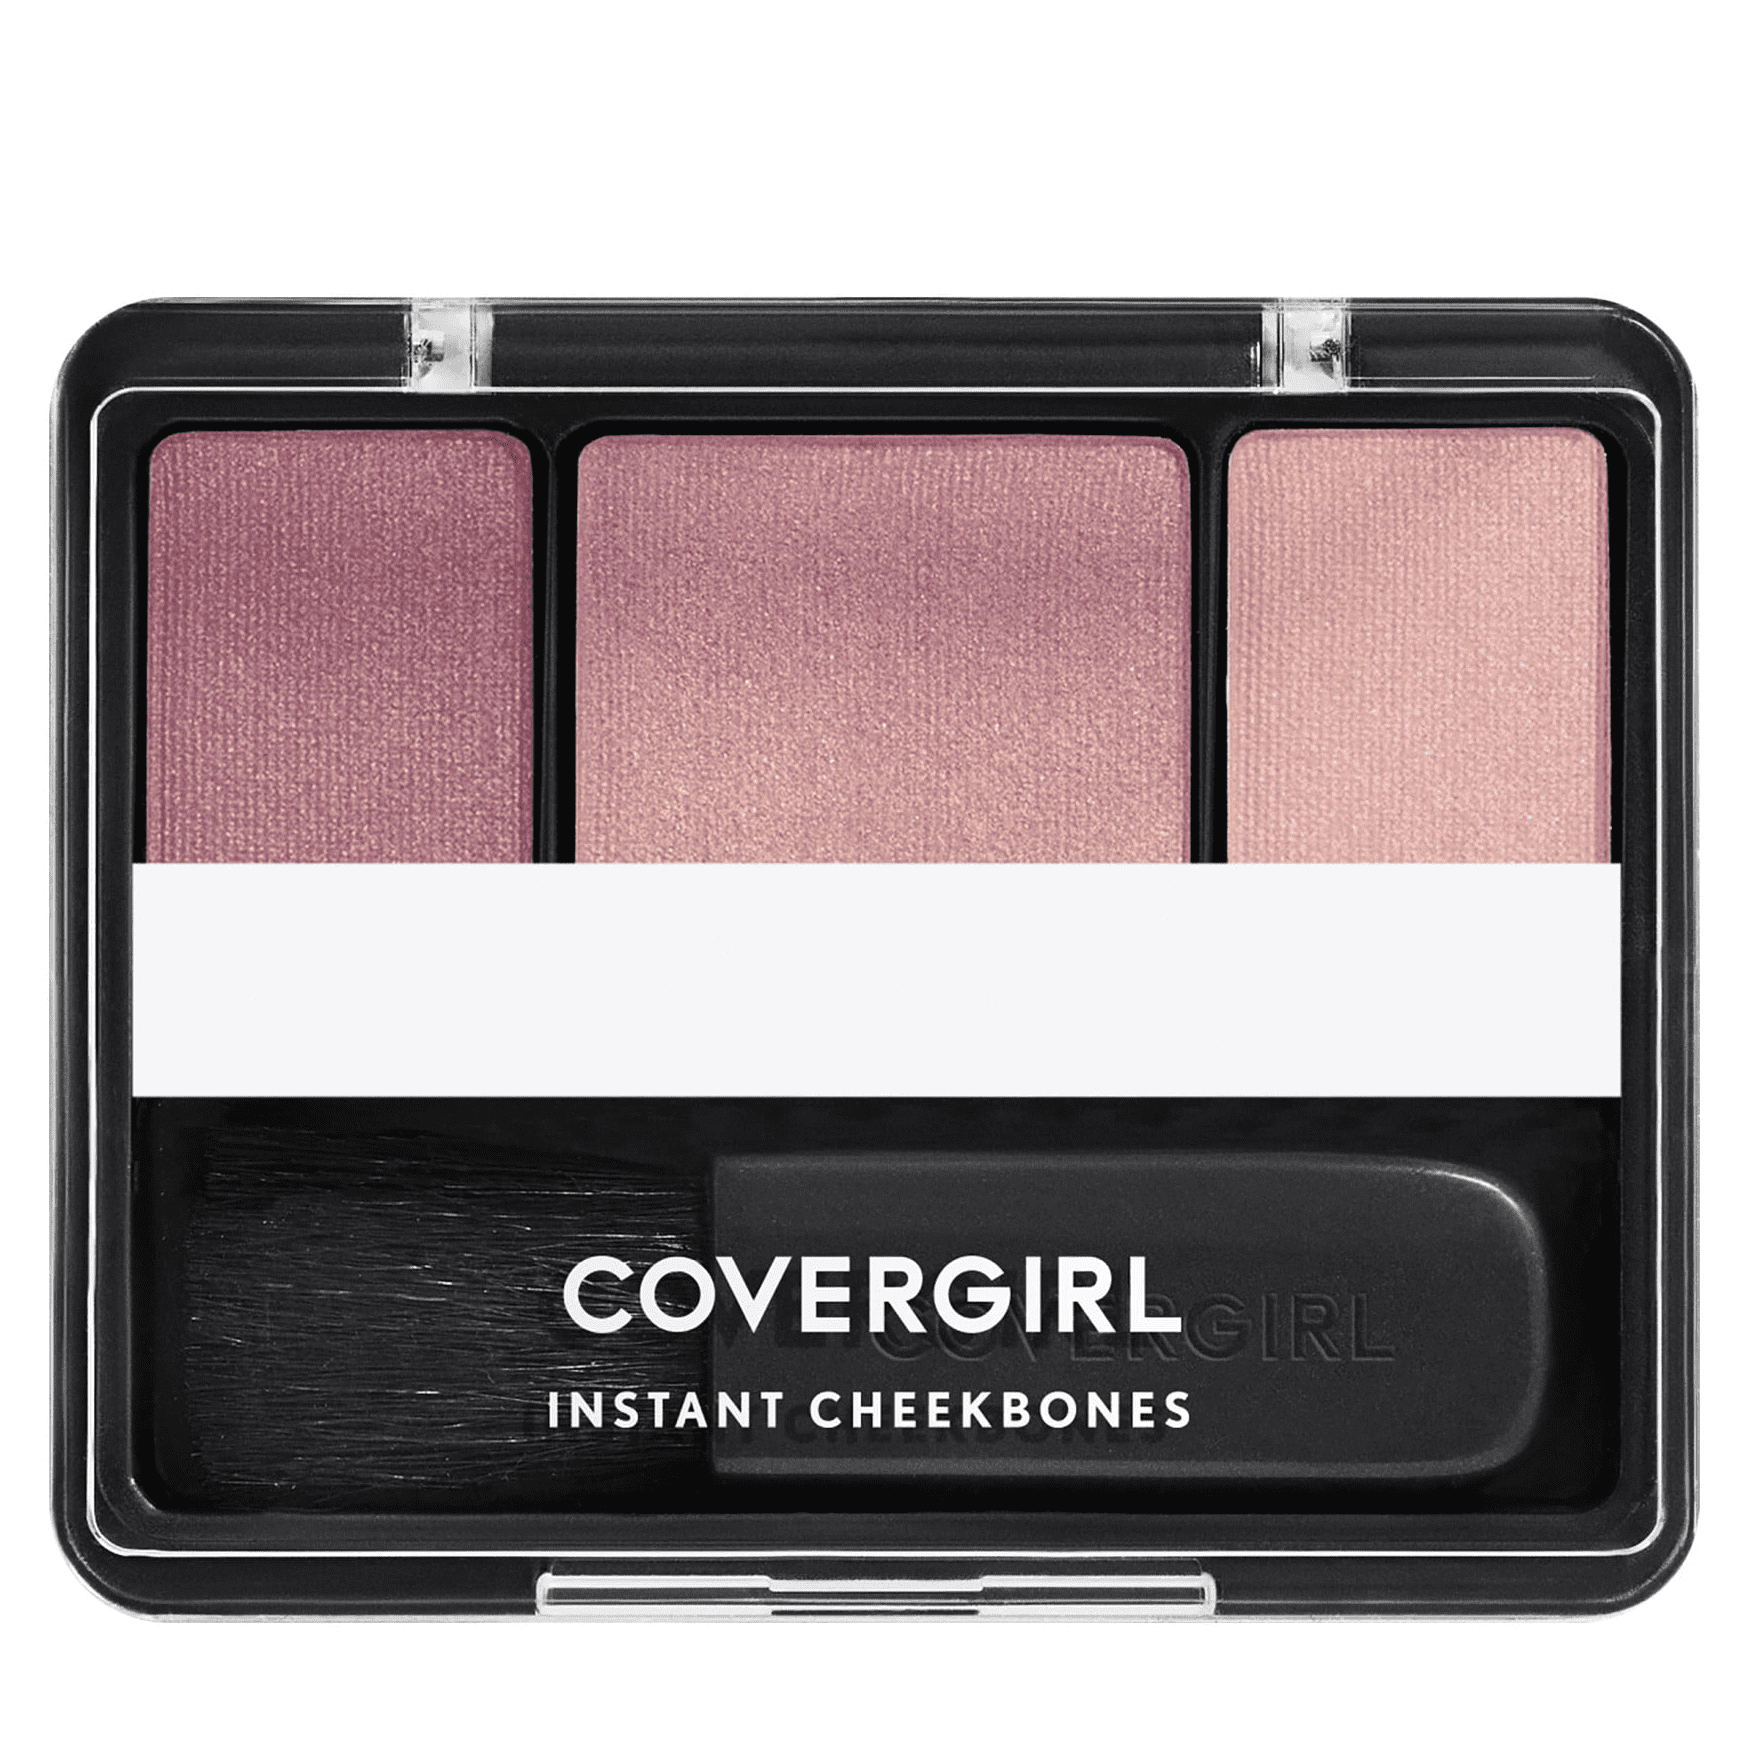 COVERGIRL Instant Cheekbones Contouring Blush, 220 Purely Plum, 0.29 oz, Blush Makeup, Pink Blush, Lightweight, Blendable, Natural Radiance, Sweeps on Evenly